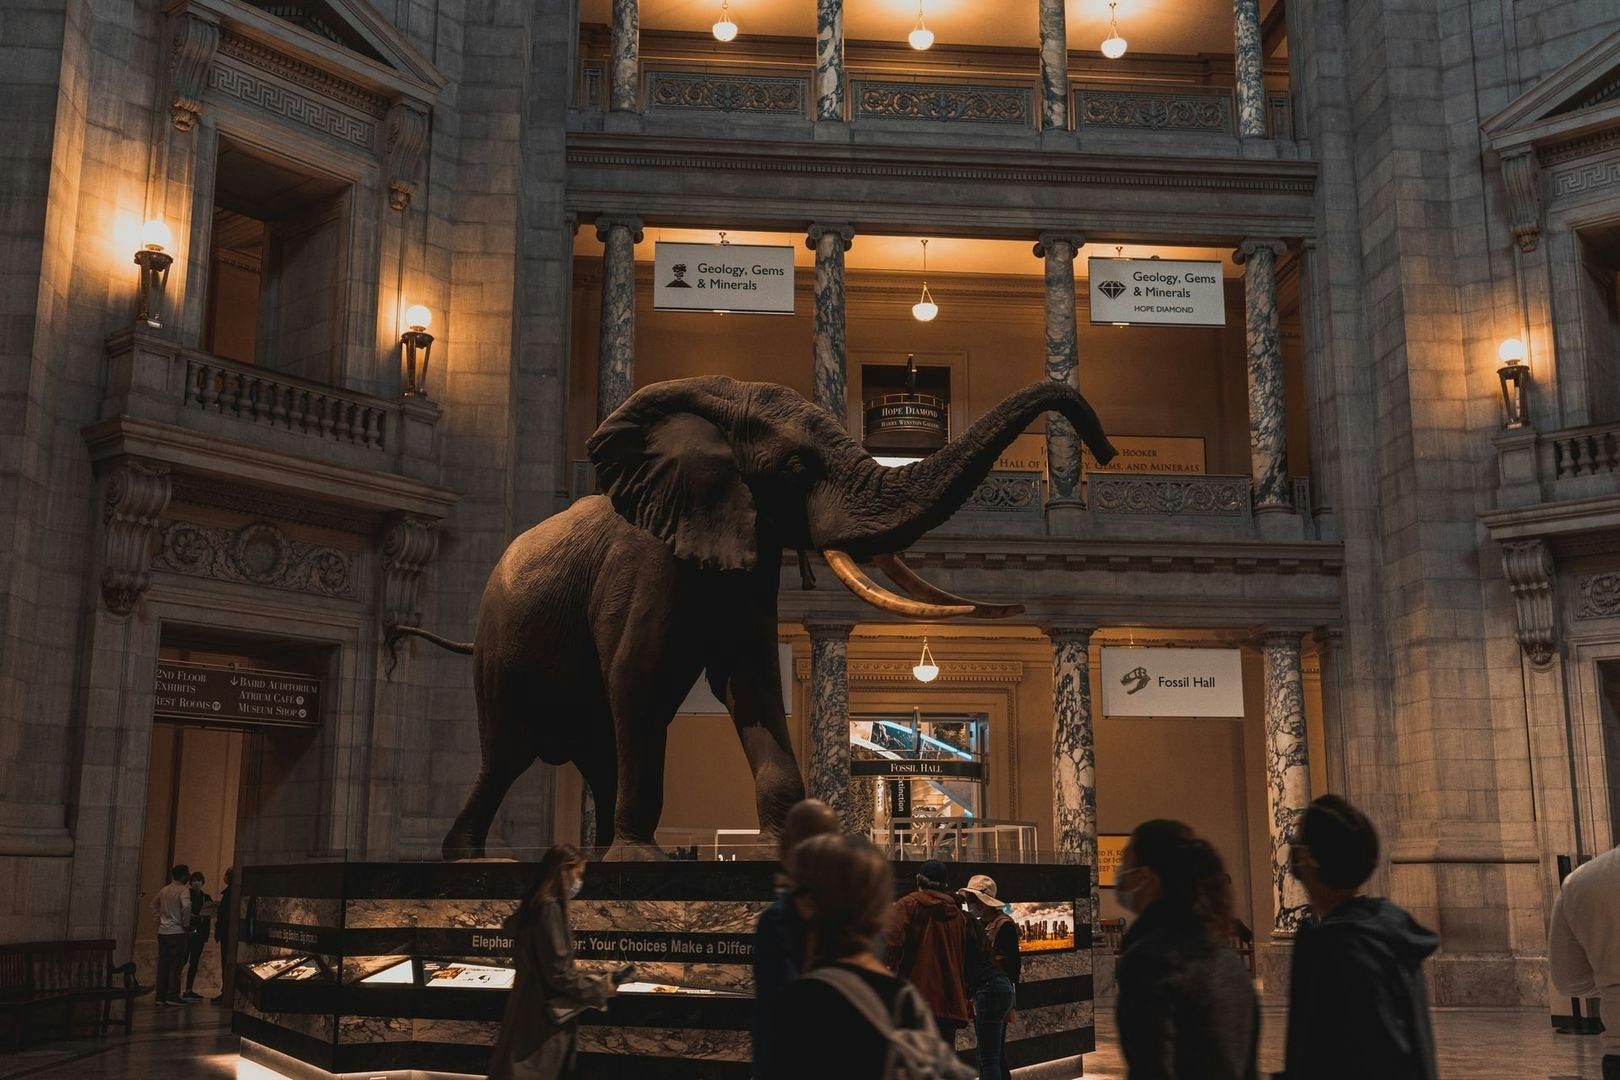 Smithsonian National Museum of Natural History self-guided audio tour